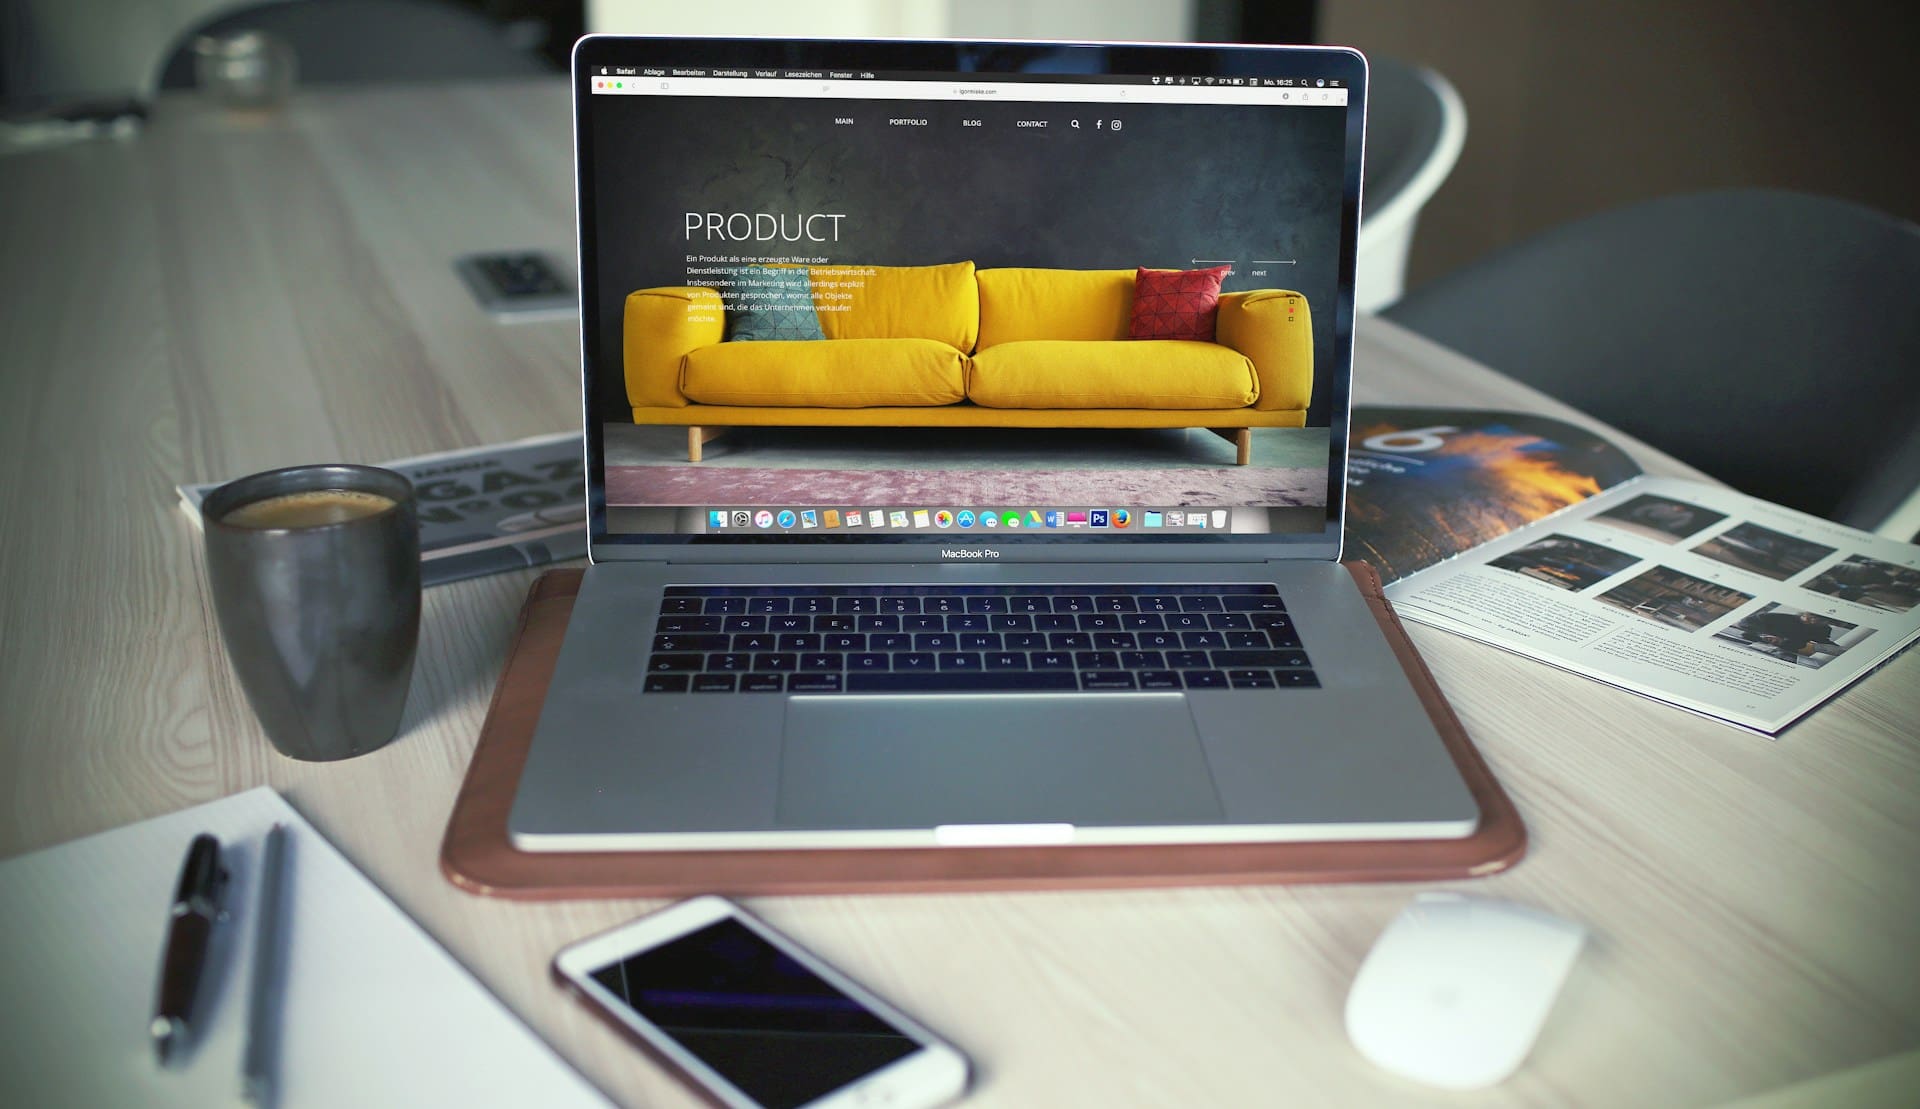 A sofa companies homepage being shown on a MacBook in a home environment